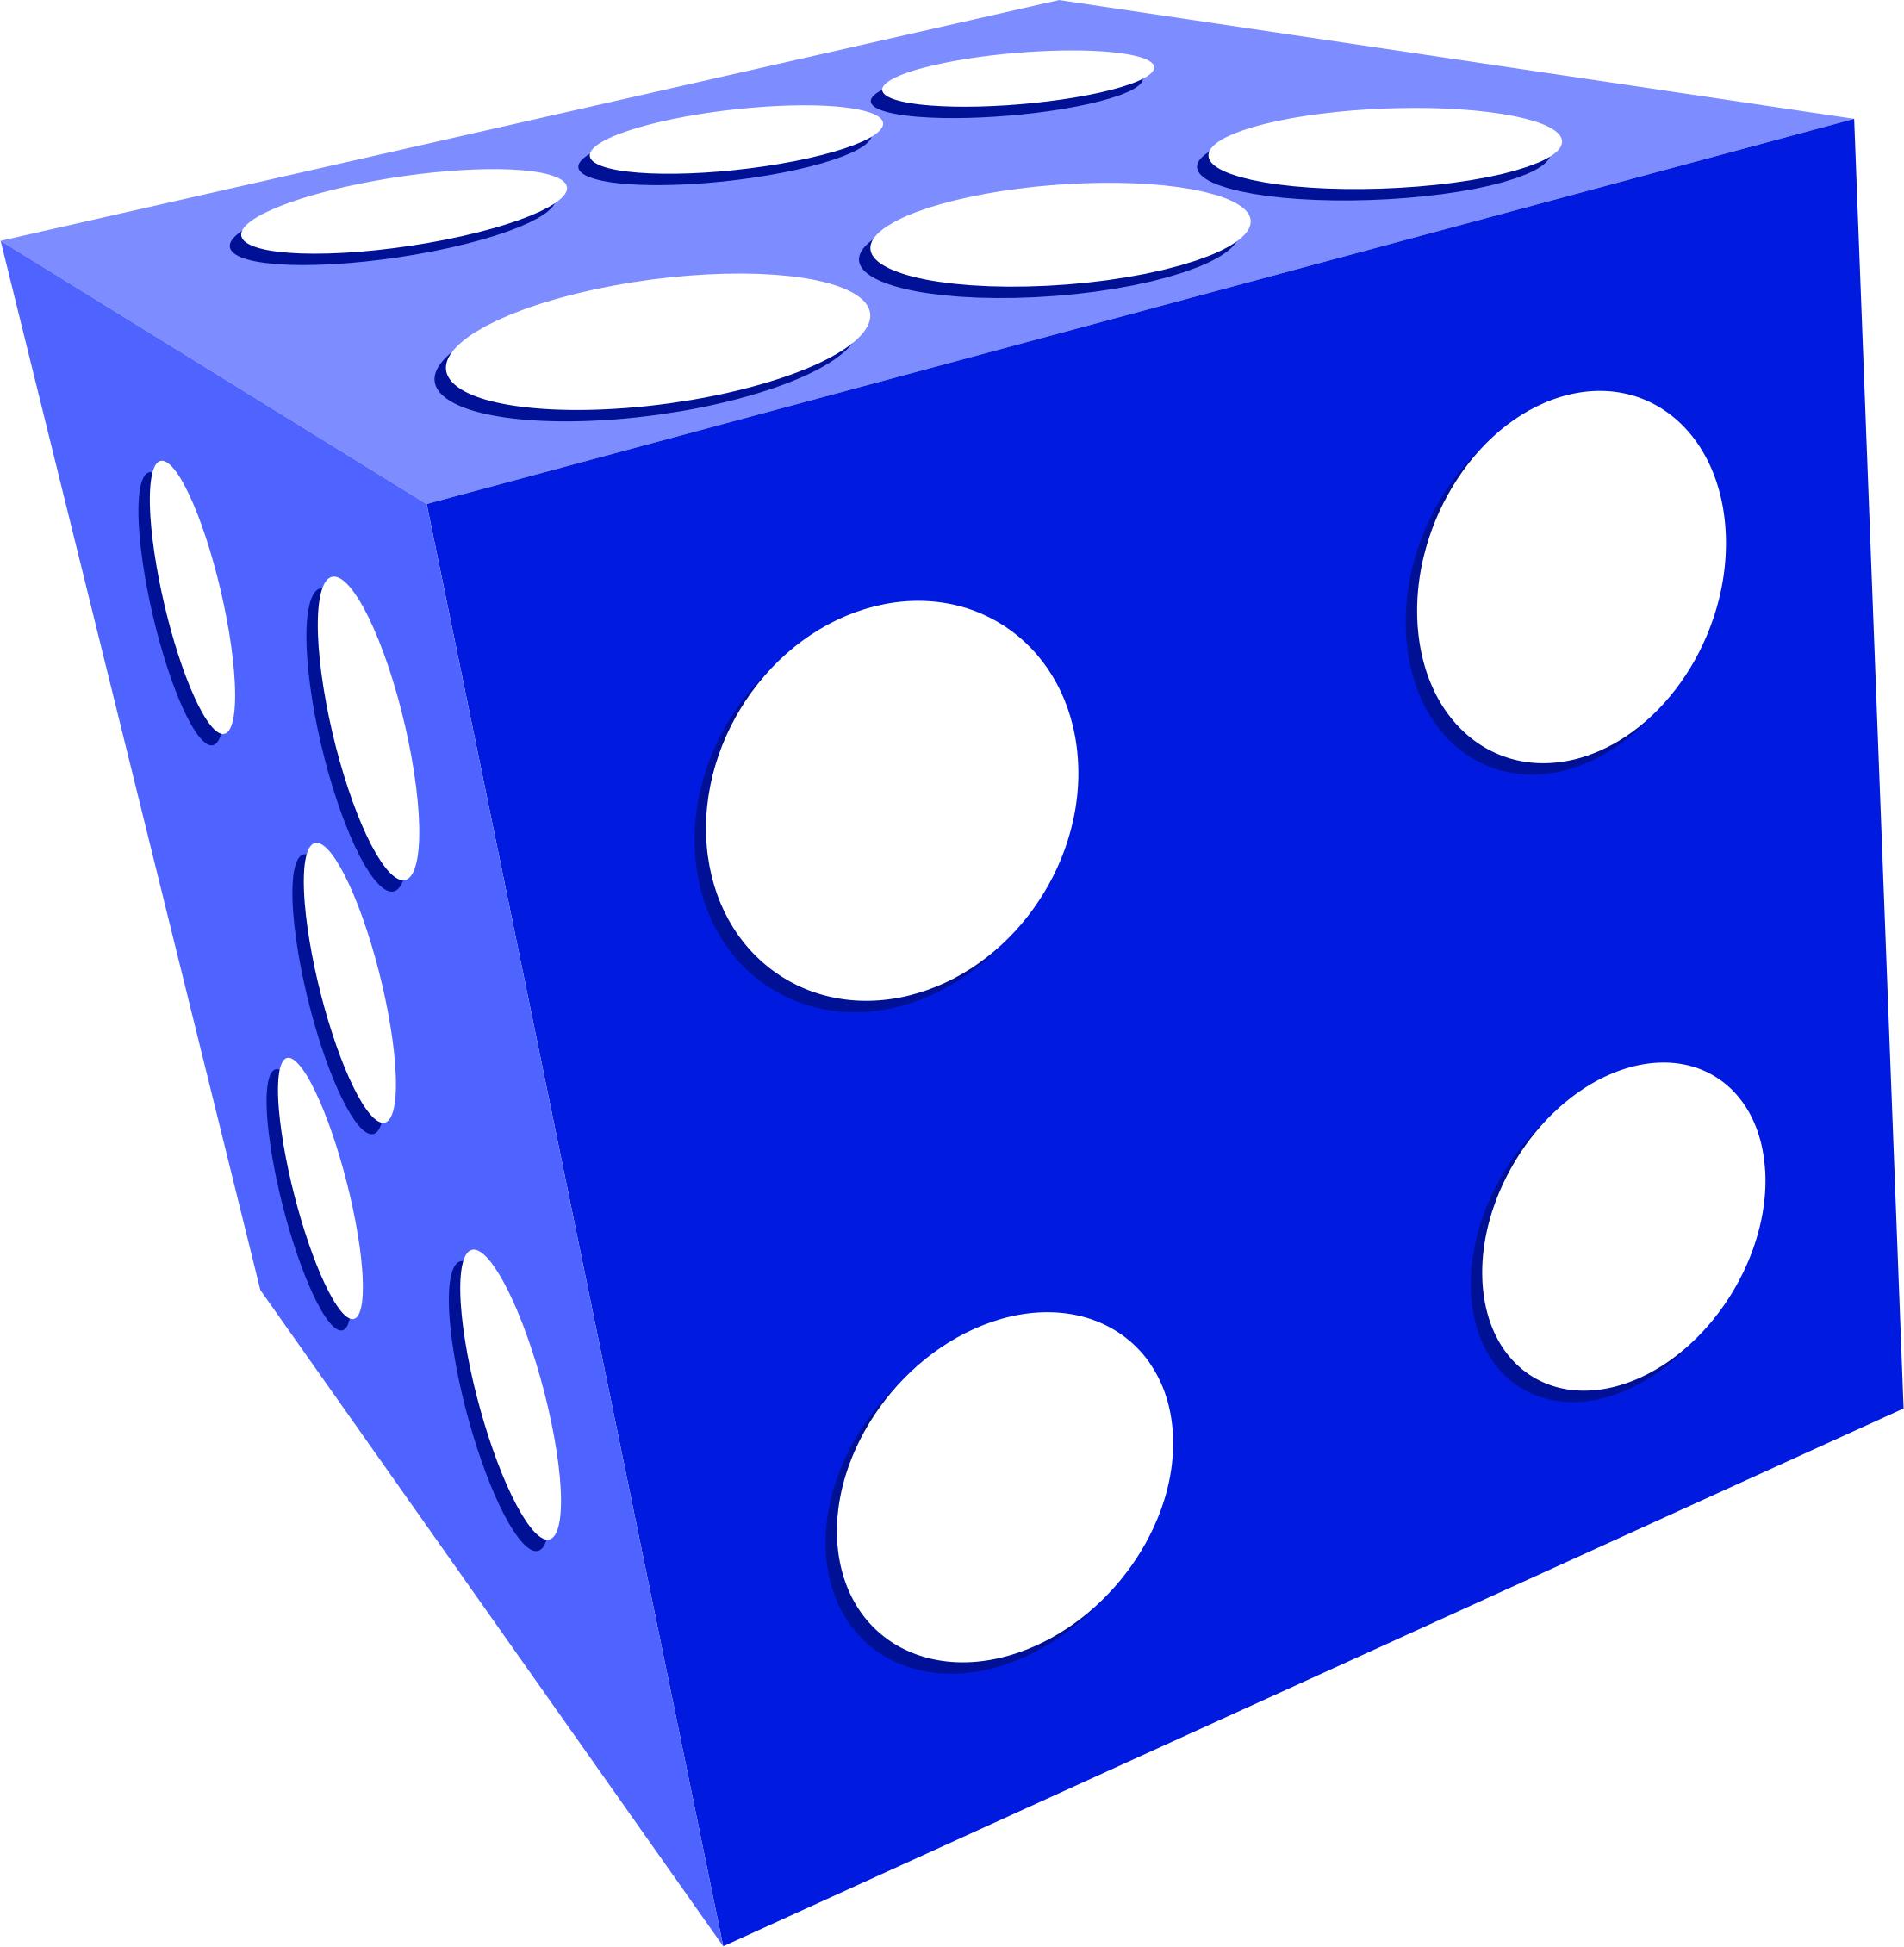 De a jouer - playing dice PNG icons